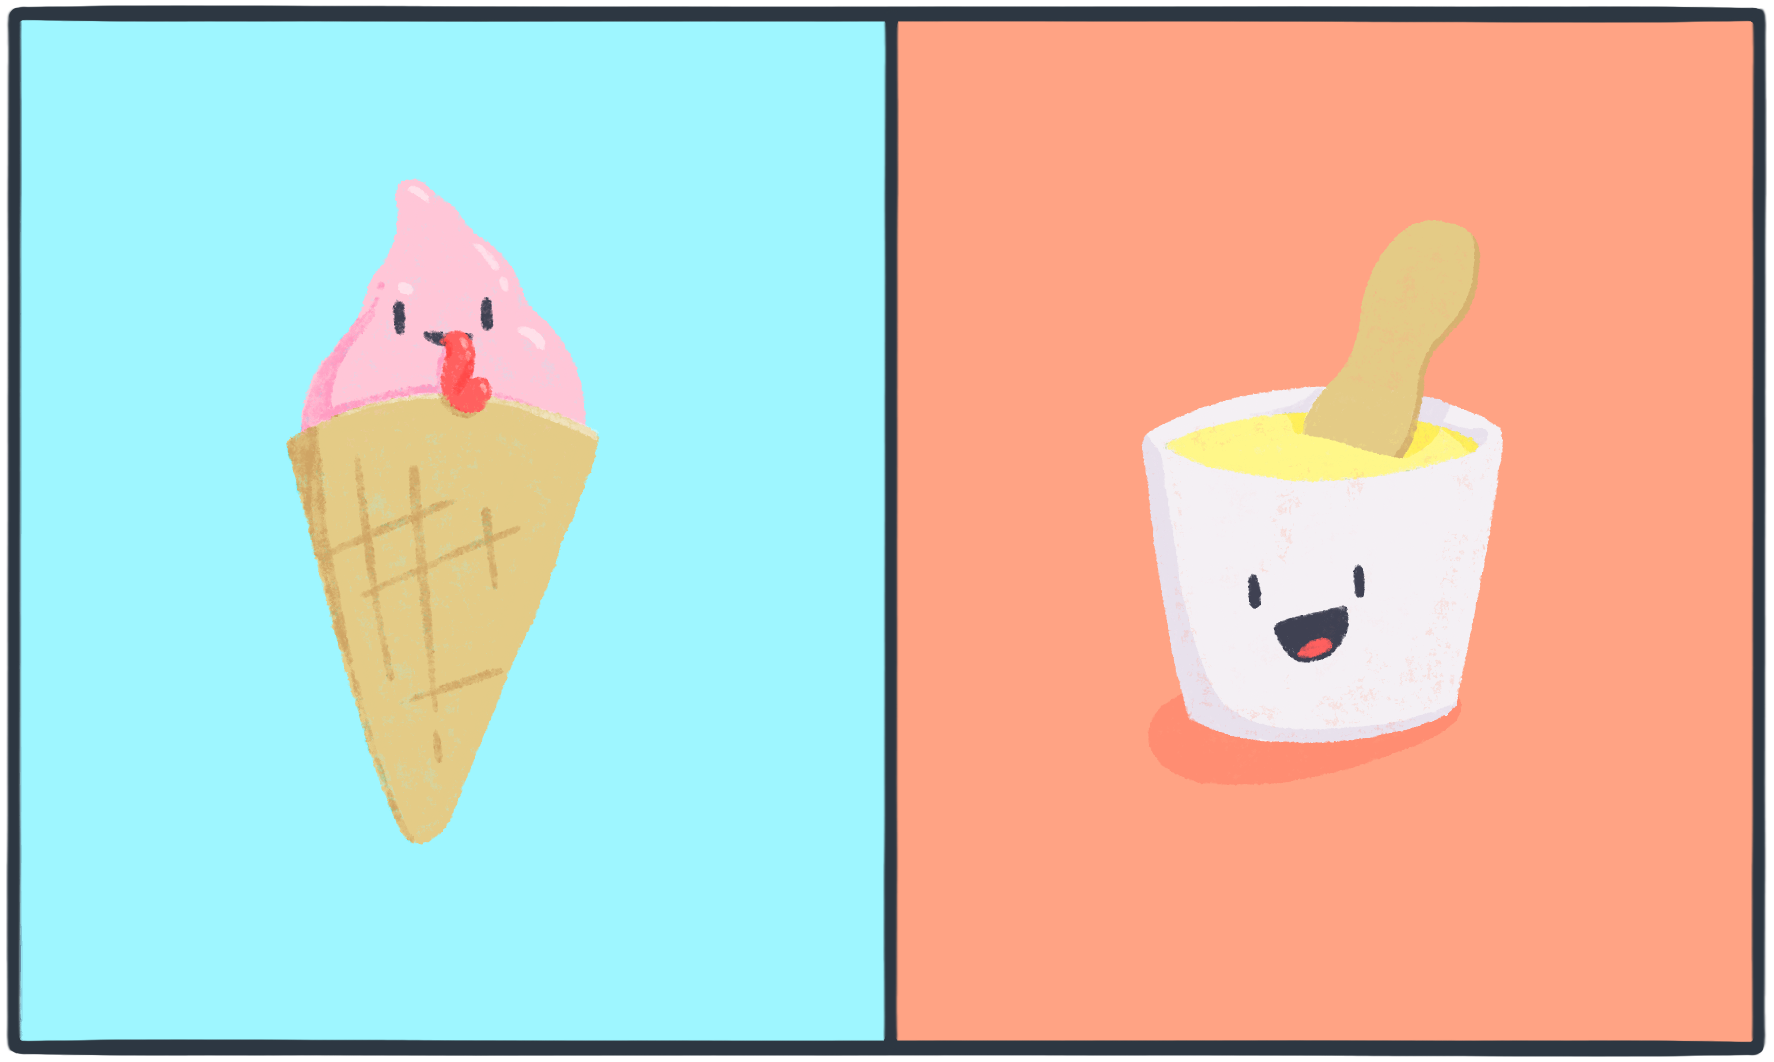 An ice cream cone on the left and an italian ice on the right